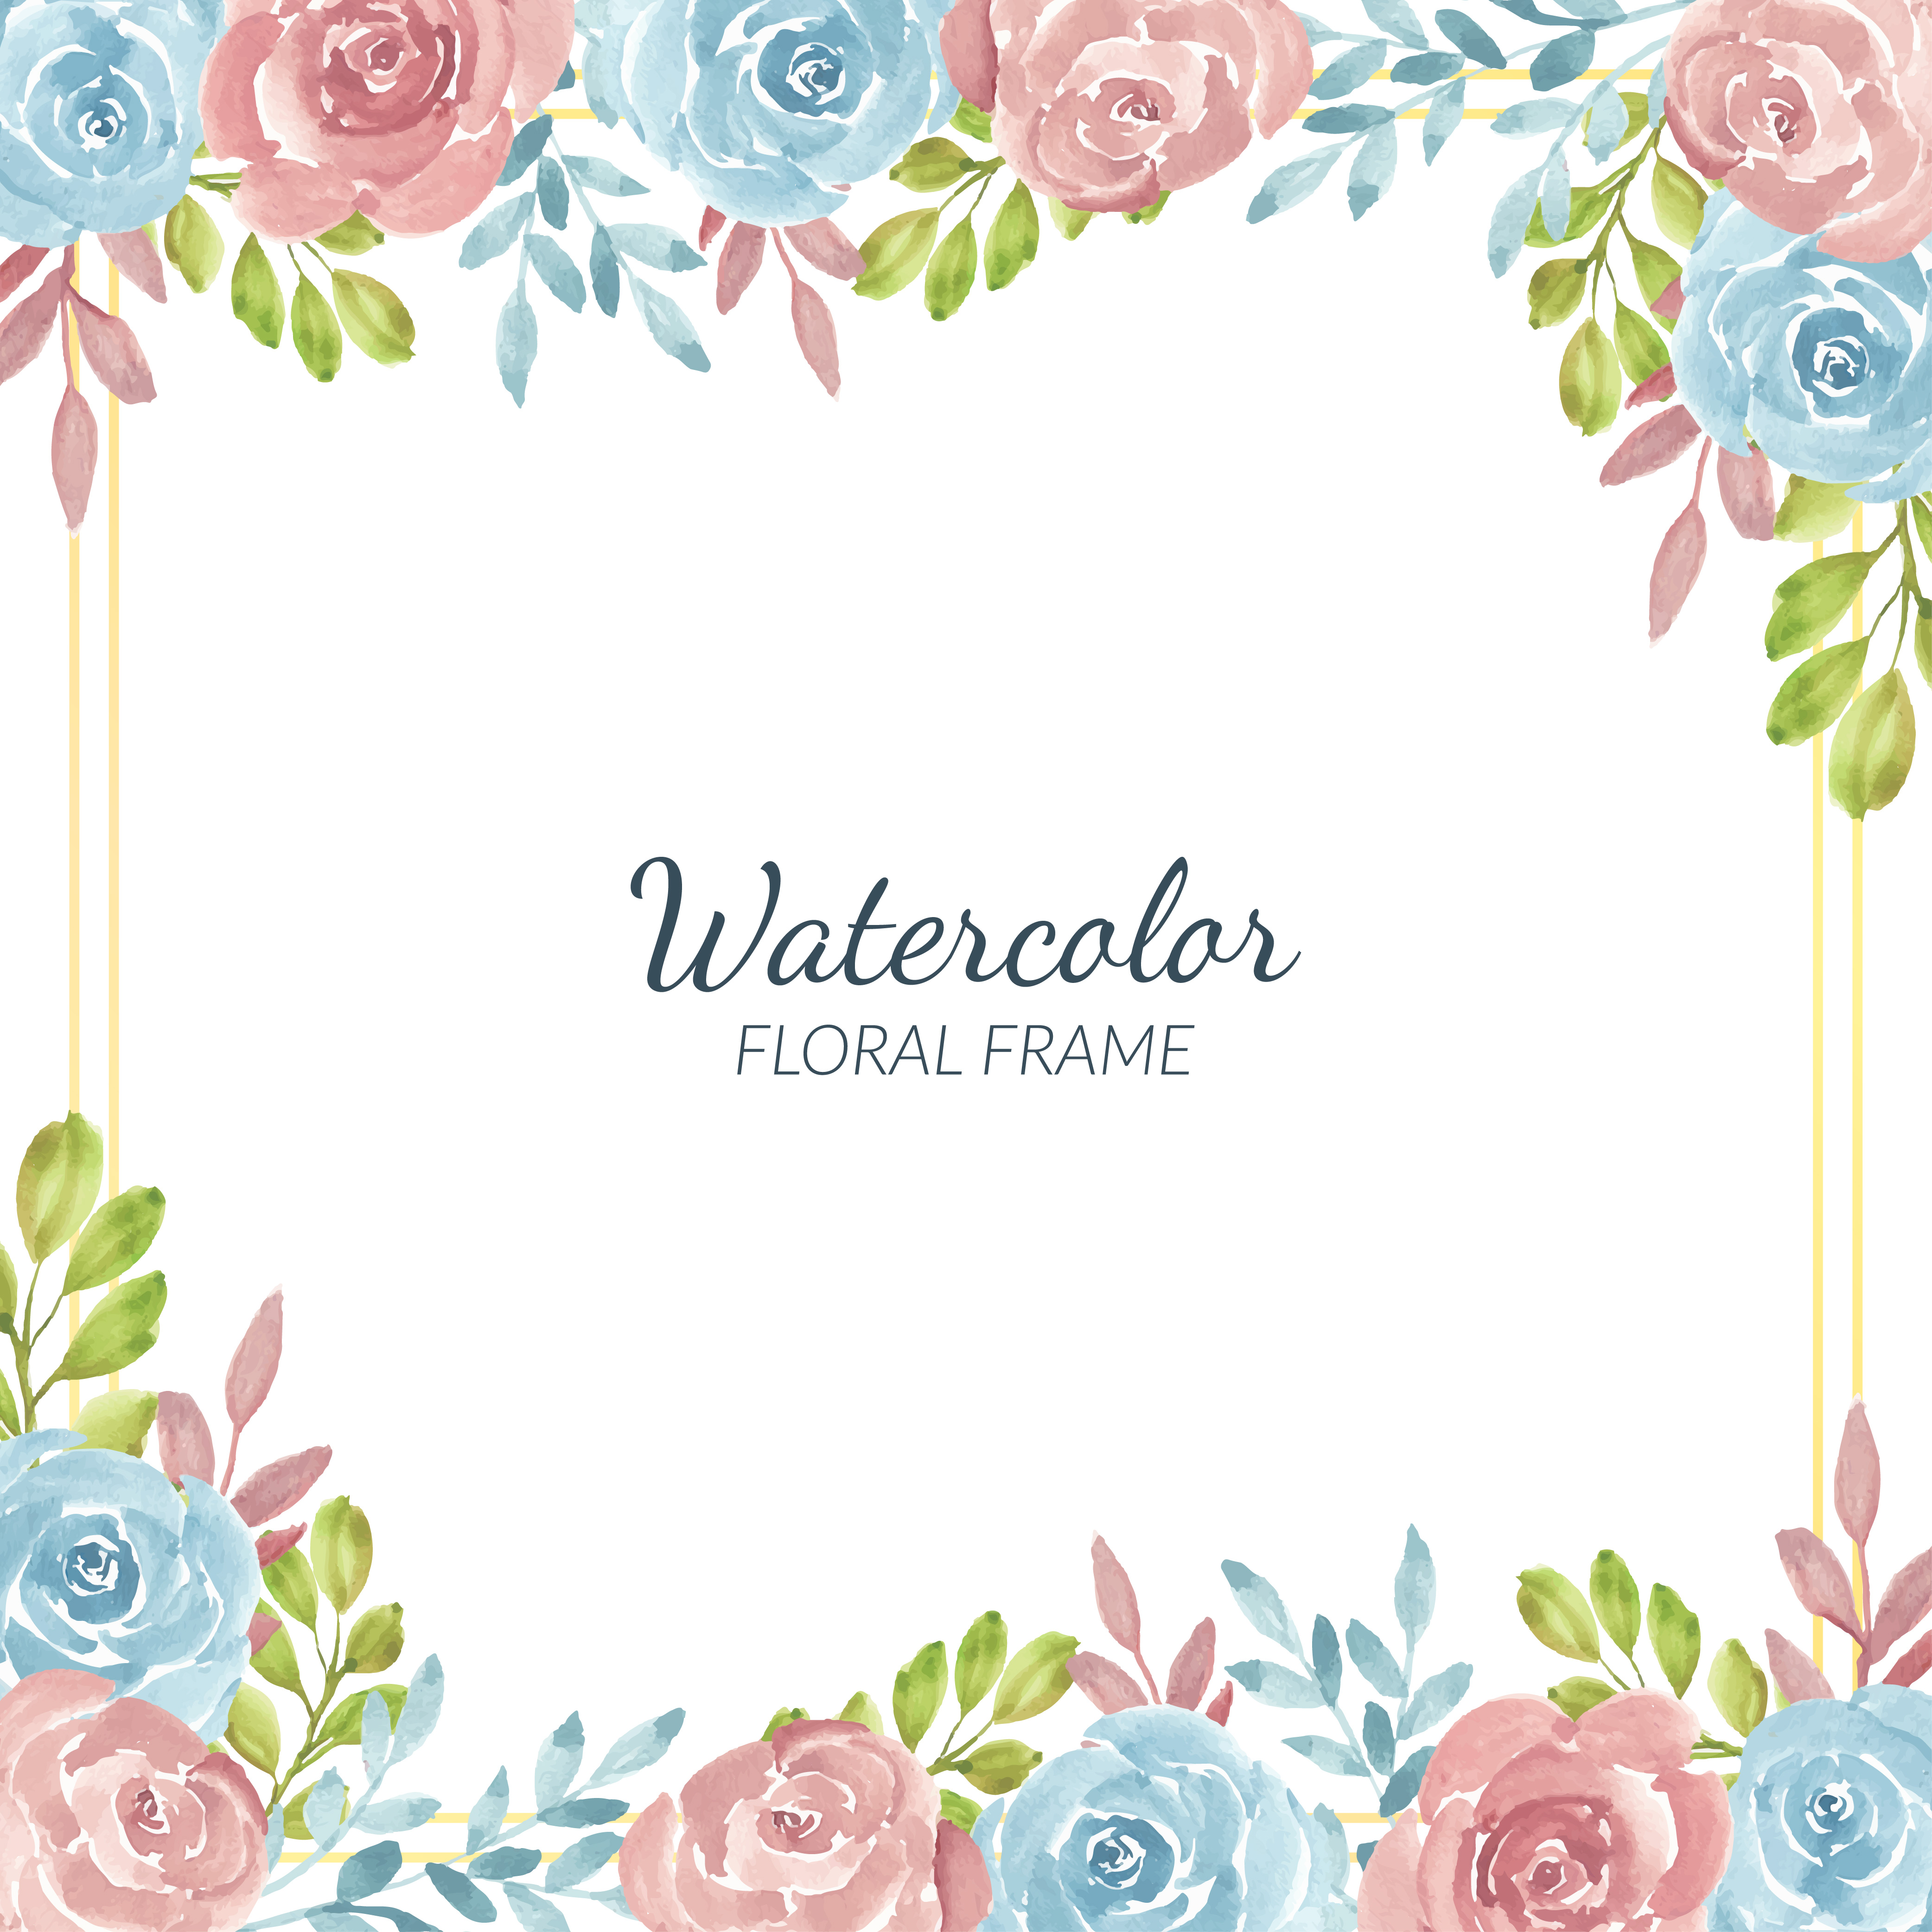 Watercolor Rustic Rose Flower Border And Gold Frame Download Free Vectors Clipart Graphics Vector Art